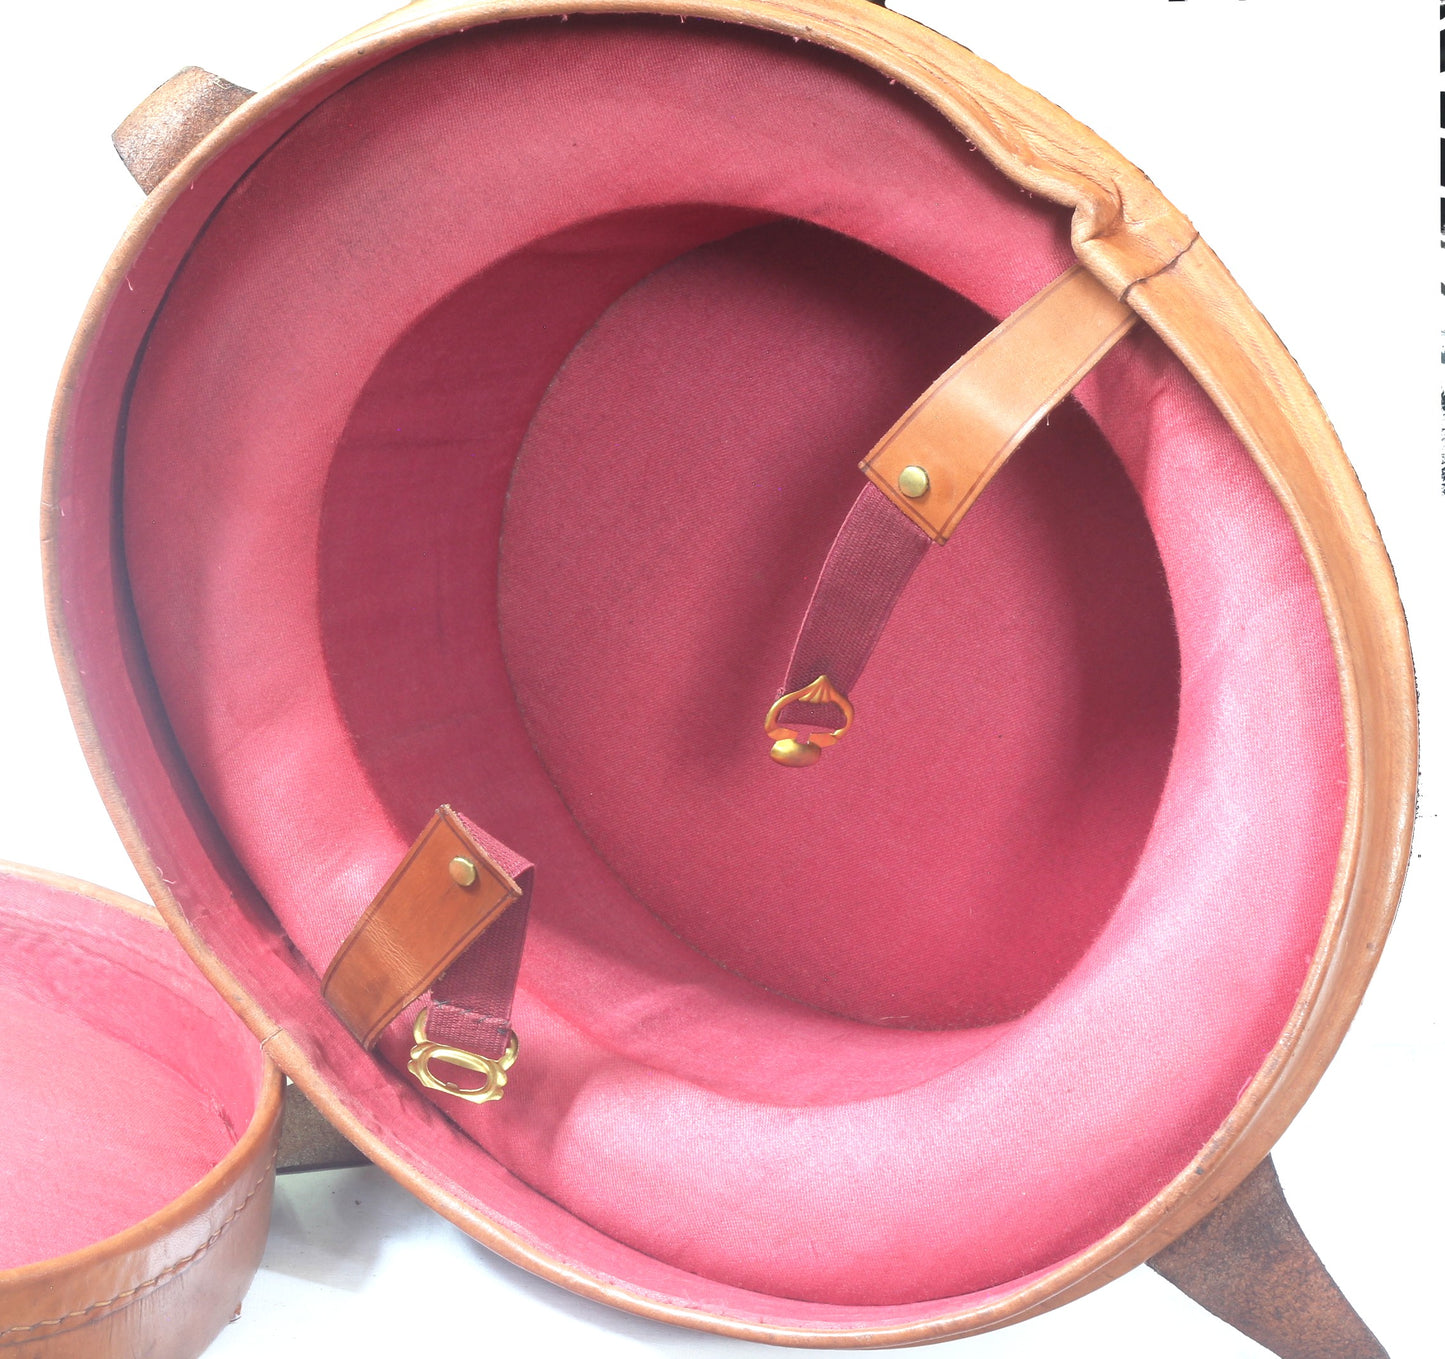 Silk Top Hat Size 7⅛-7¼ in Leather Hat Box